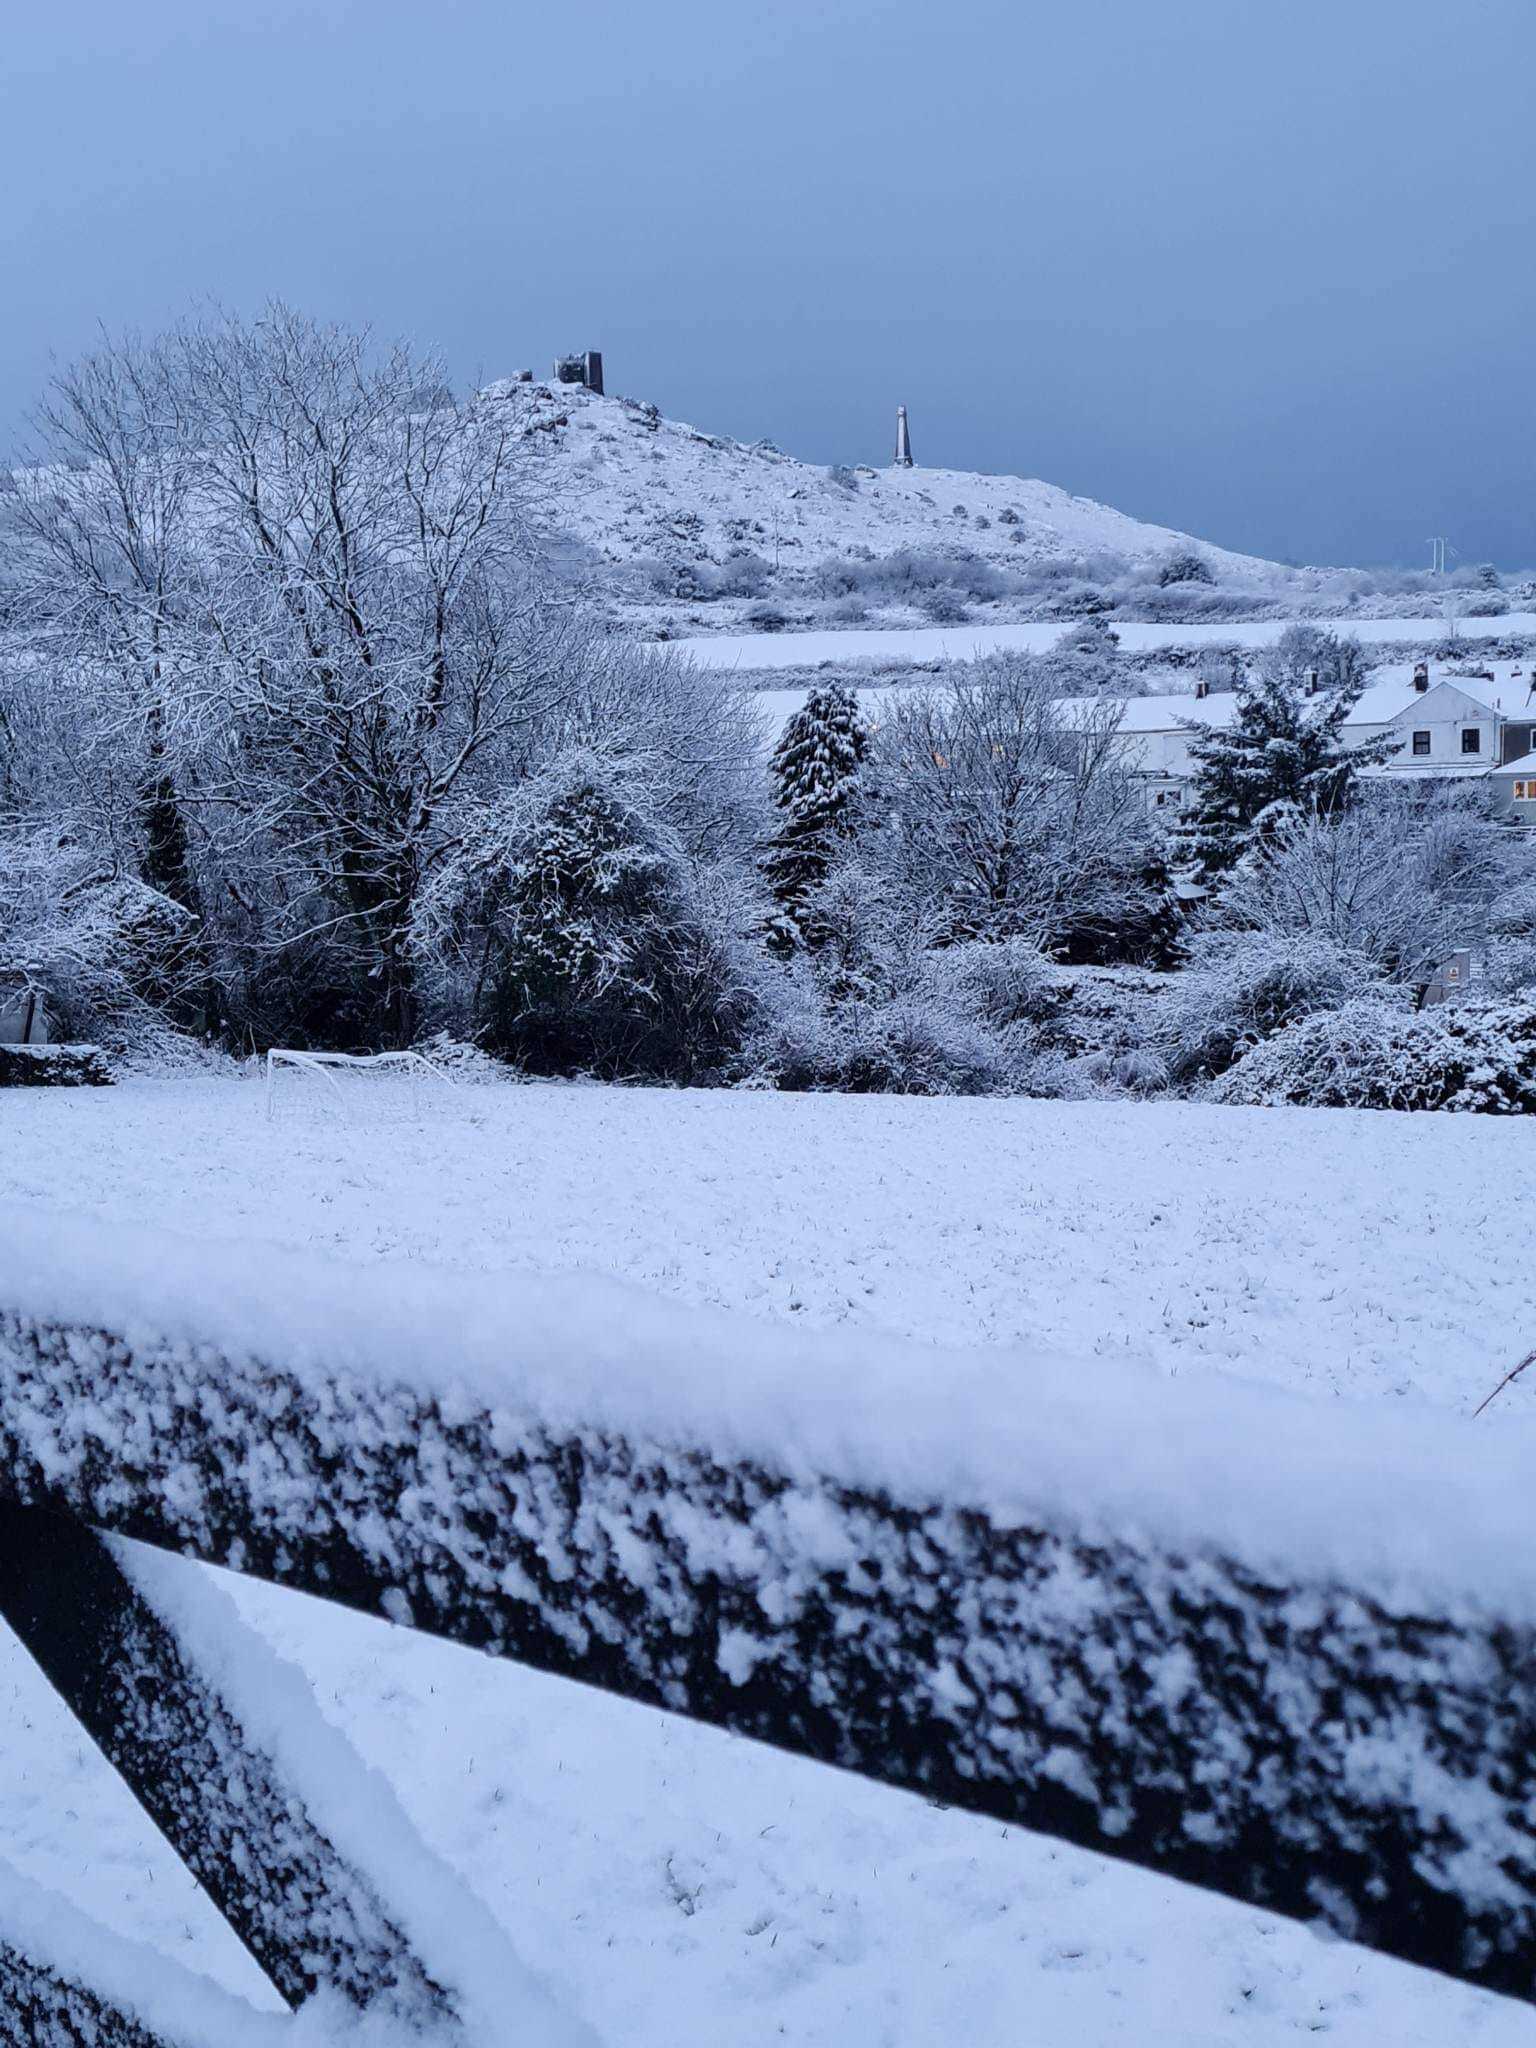 These pictures around Redruth and Carn Brea were captured by Anna Benney